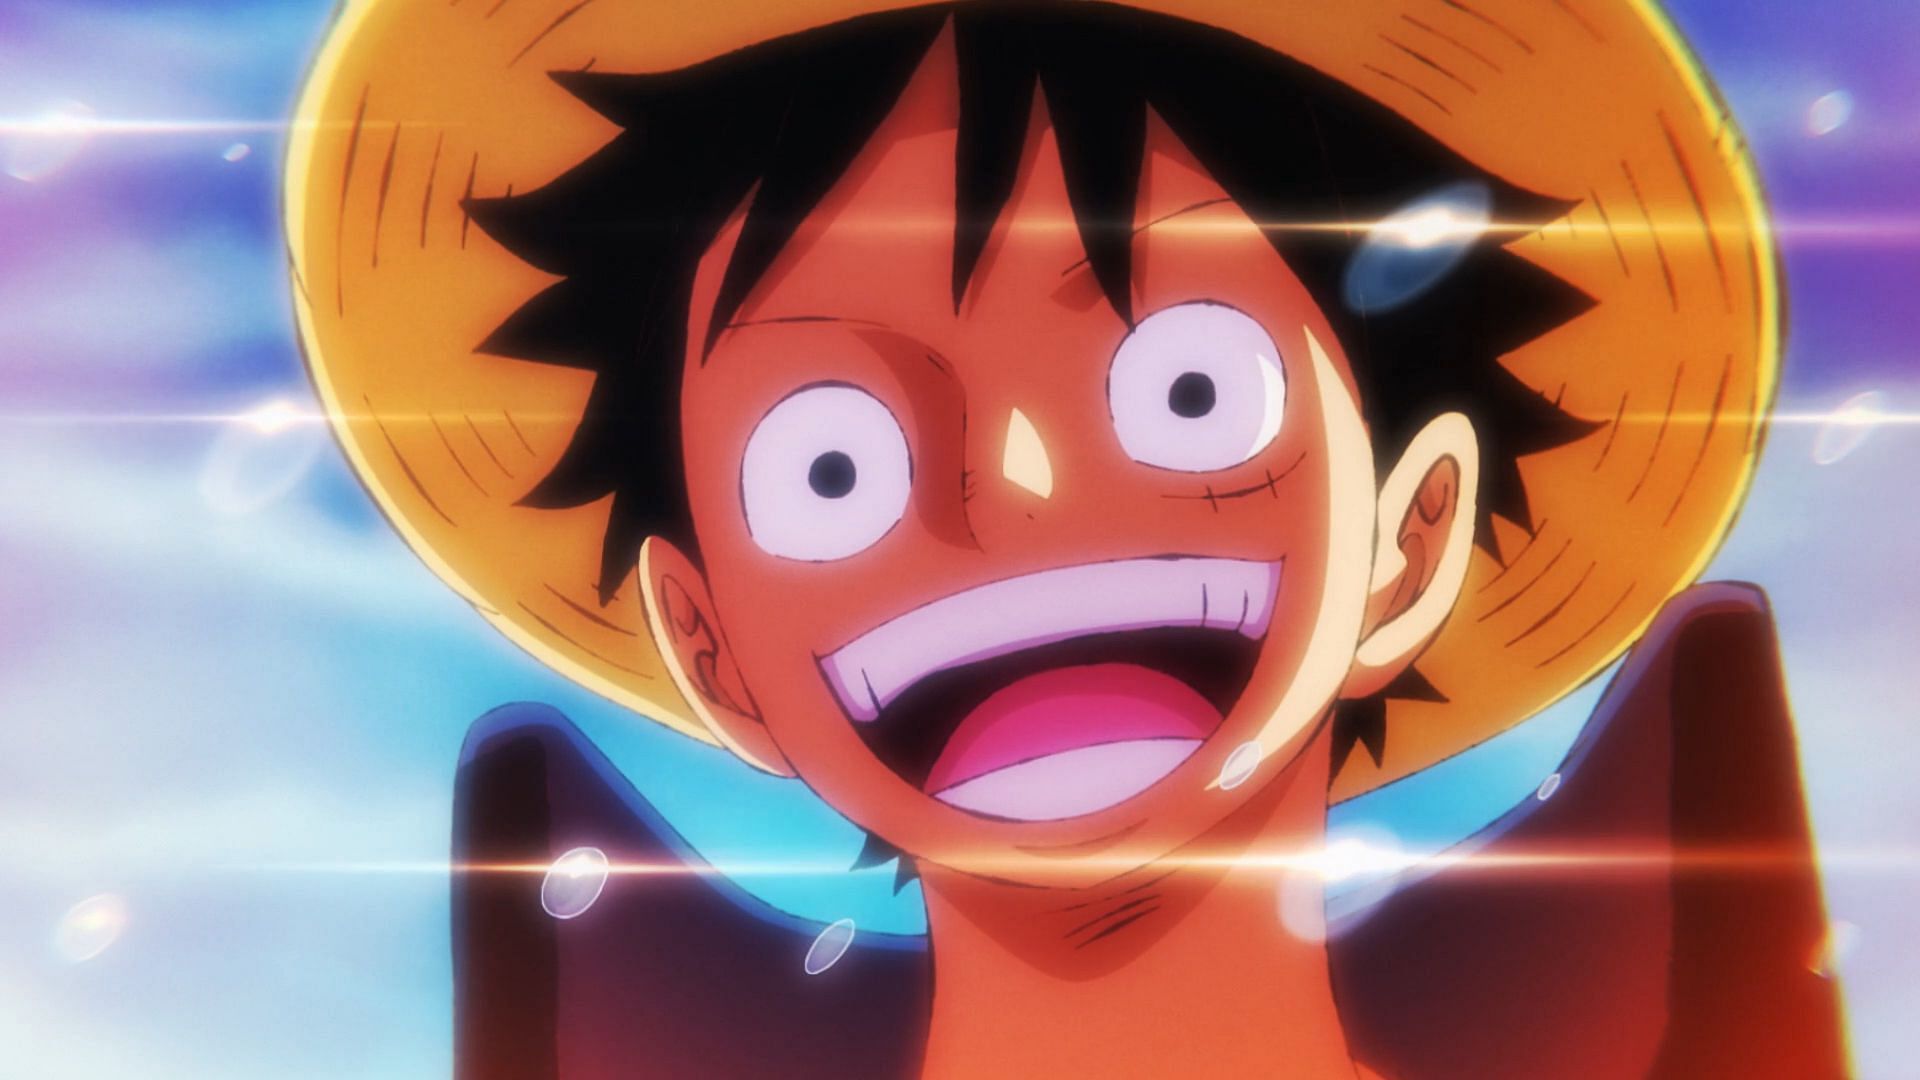 Luffy as seen in the One Piece anime series (Image via Toei Animation)